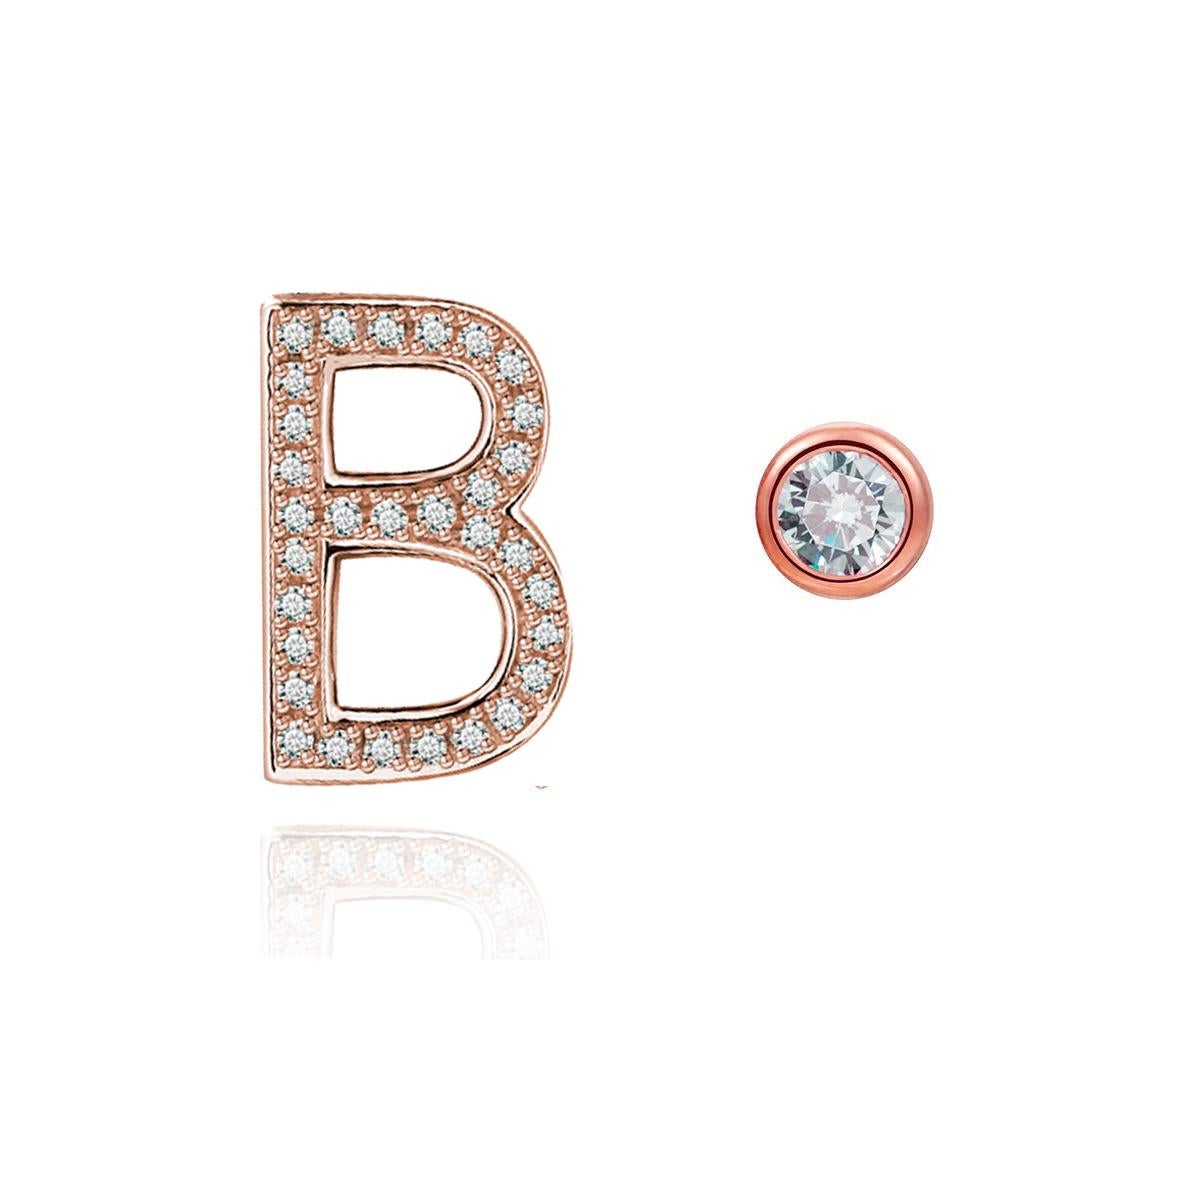 Nothing says YOU more than YOU. You are unique. You are bold.  You're not afraid to share who you are.  These initial bezel mismatched earrings tell the brilliant story of YOU. .925 sterling silver base also available in 24k yellow or rose gold